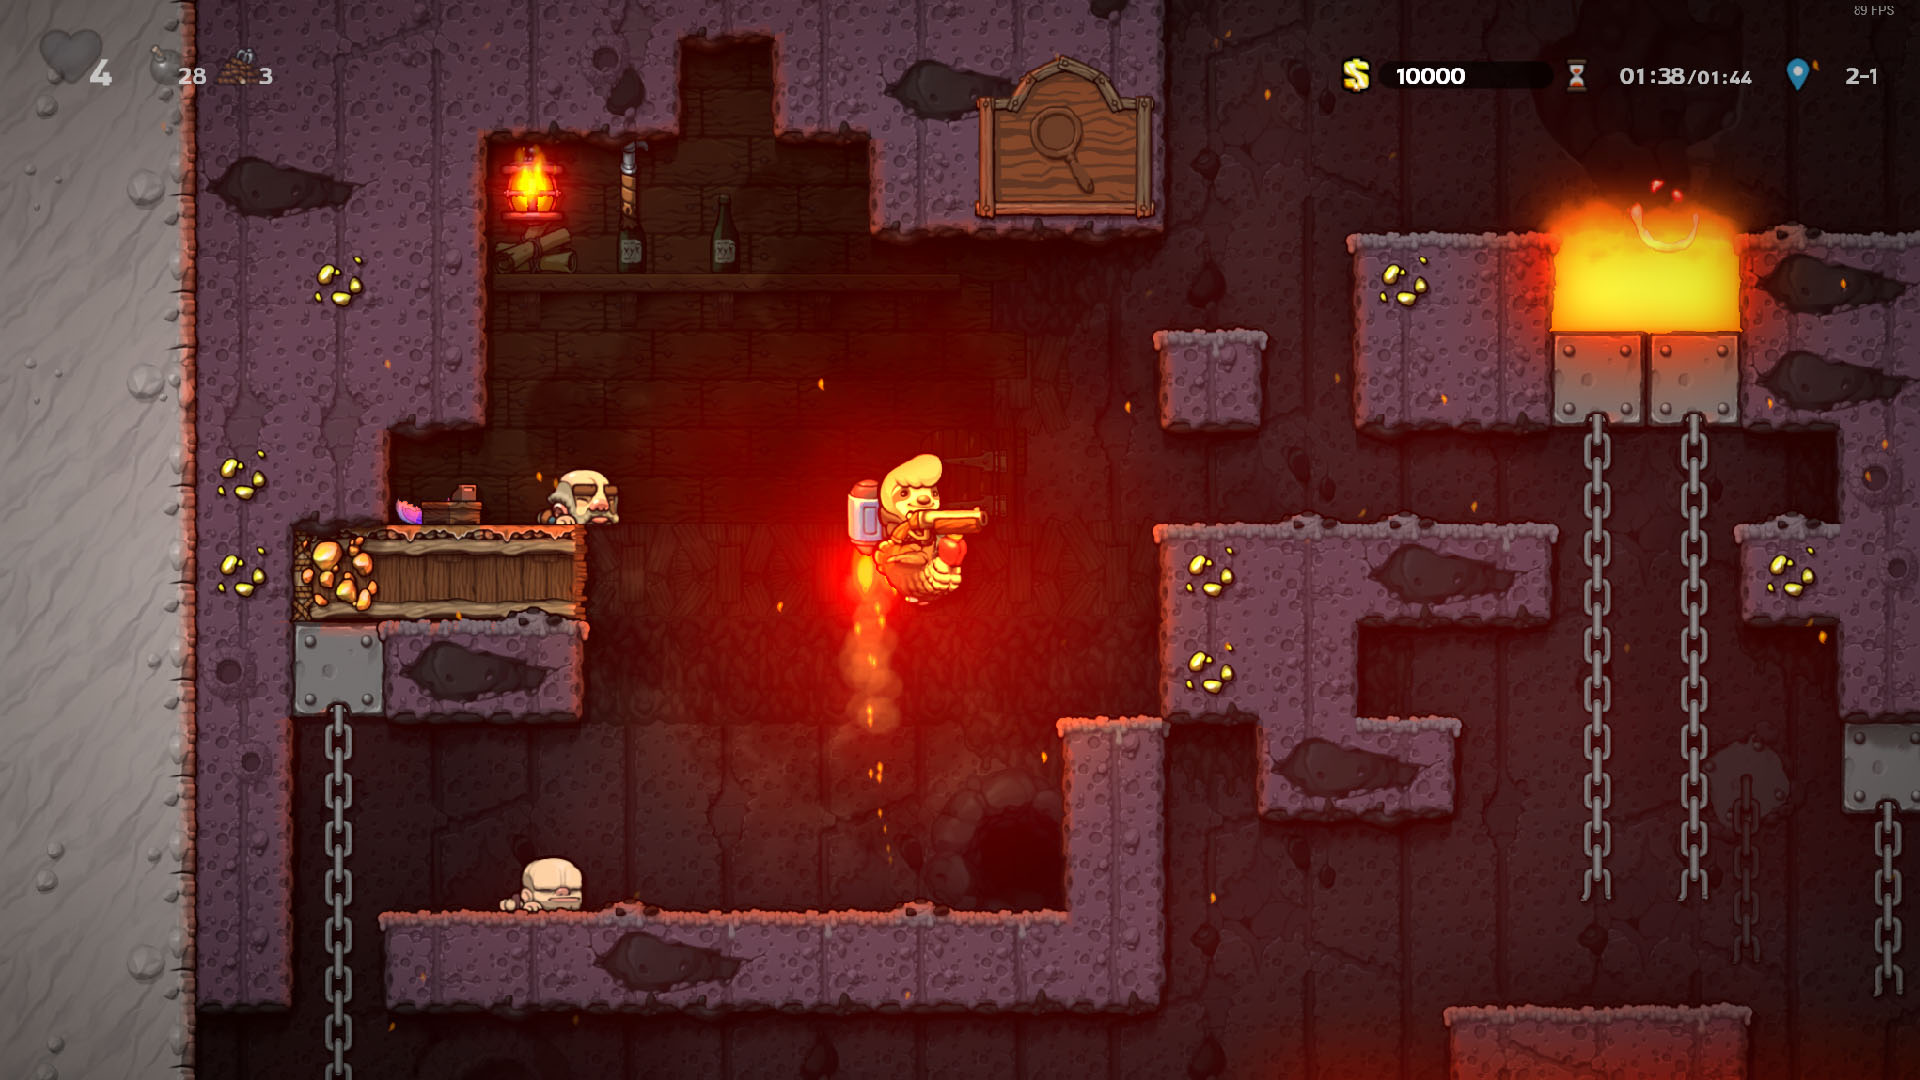 A dead shopkeeper, which the player is flying away from using a stolen jetpack.